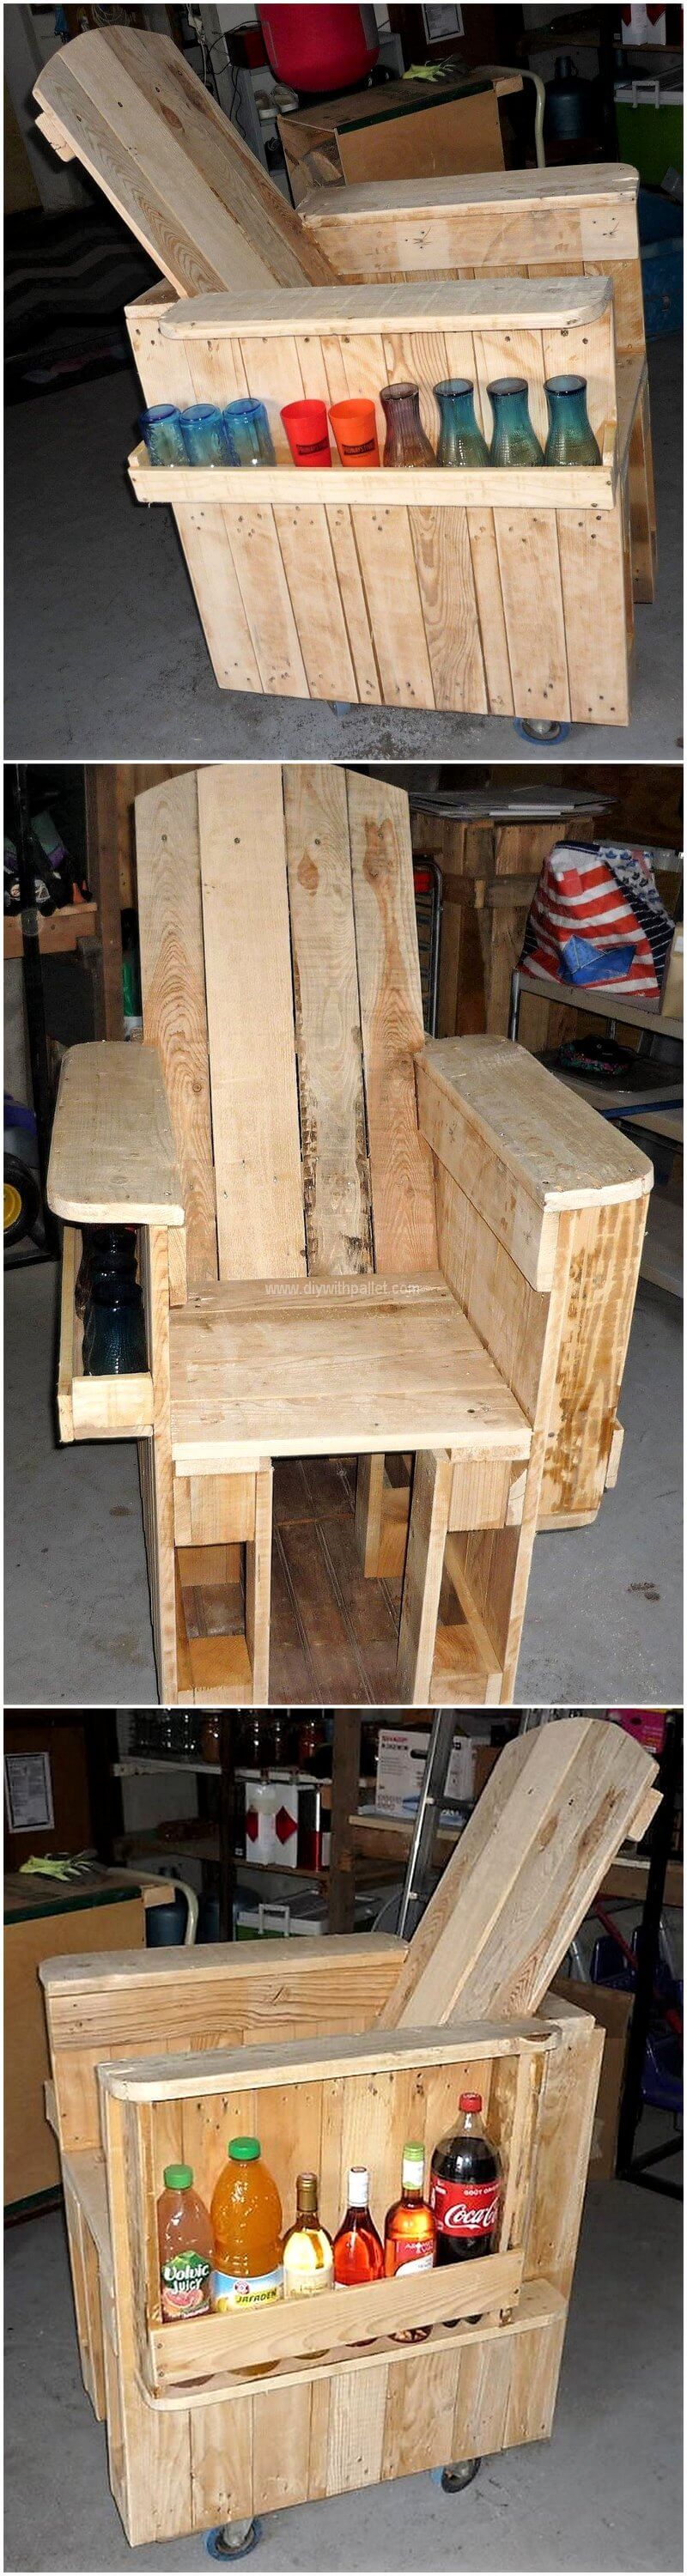 pallet chair on wheels